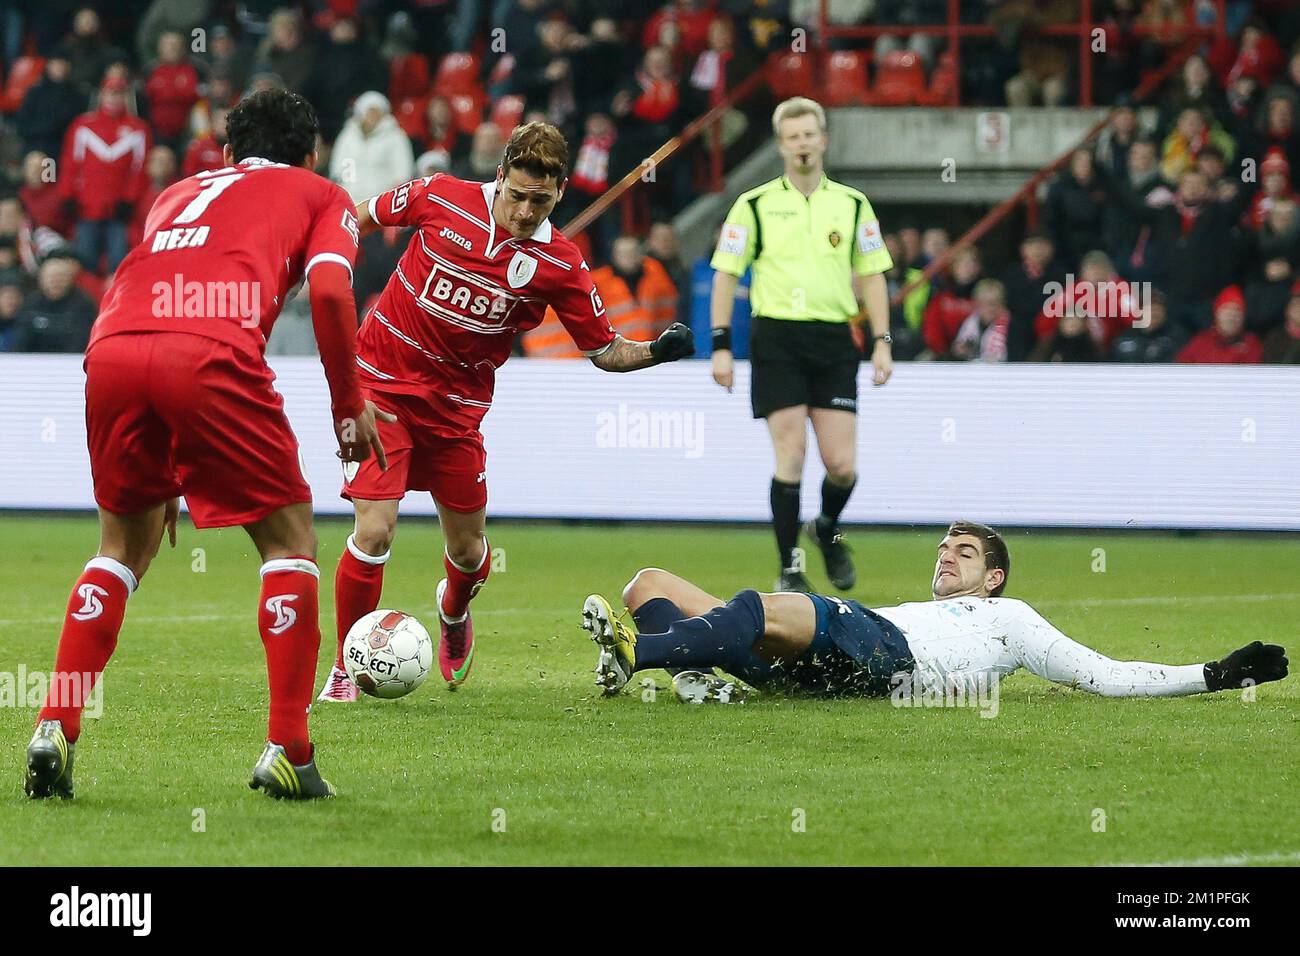 20130125 - LIEGE, BELGIUM: Standard's Maor Bar Buzaglo pictured during the Jupiler Pro League match between Standard de Liege and KV Kortrijk, in Liege, Friday 25 January 2013, on day 24 of the Belgian soccer championship. BELGA PHOTO BRUNO FAHY Stock Photo